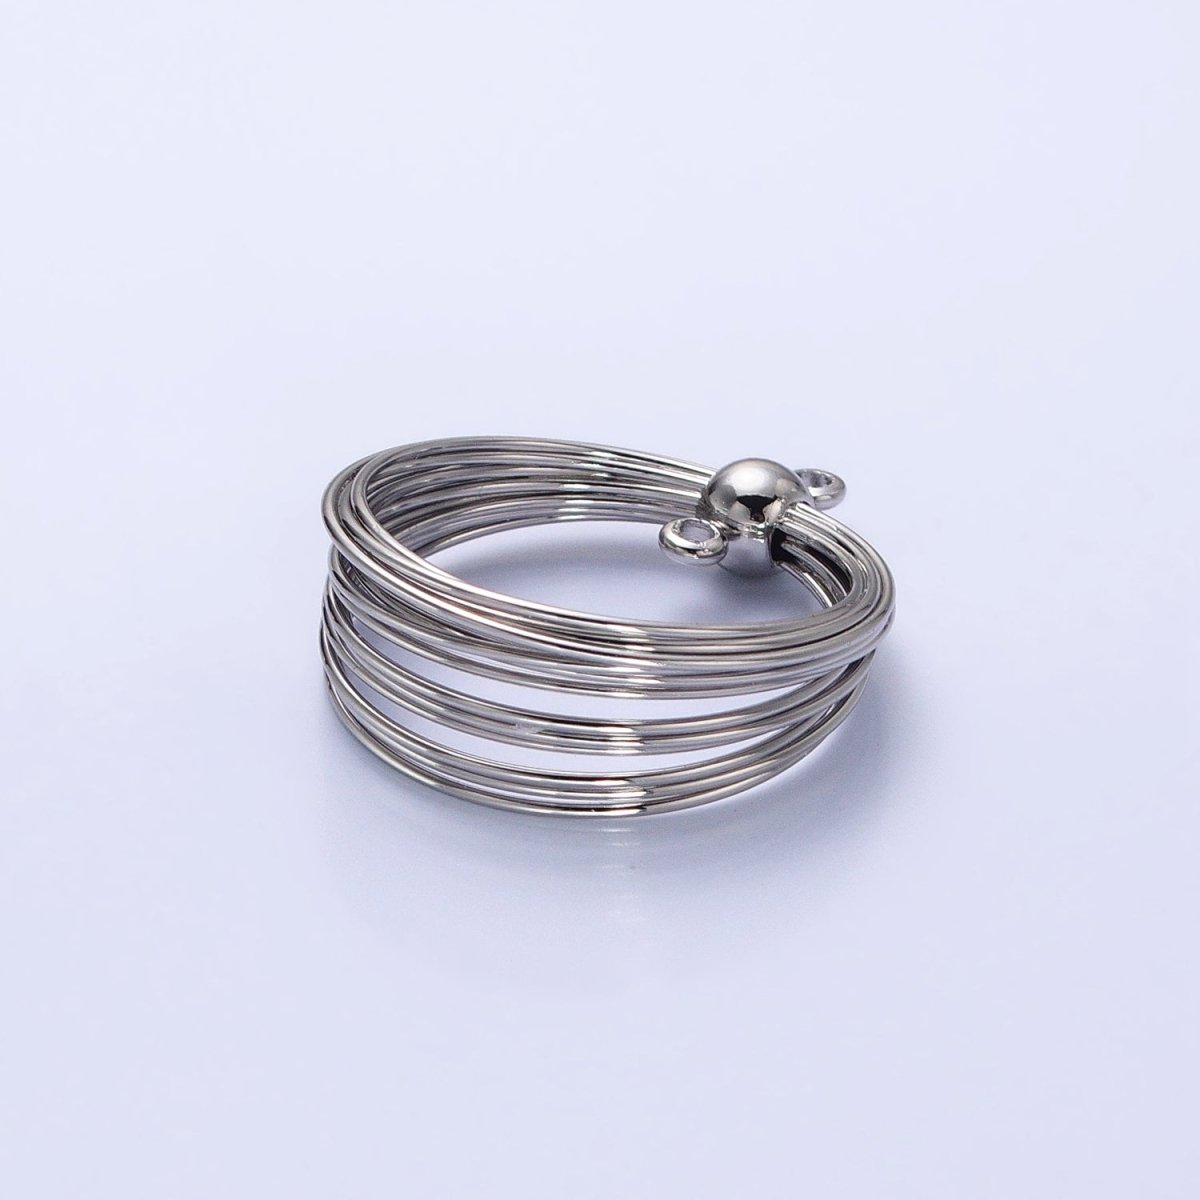 Gold Wire Round Layer Charm for Necklace Earring Component Jewelry Making Z-171 Z-172 - DLUXCA